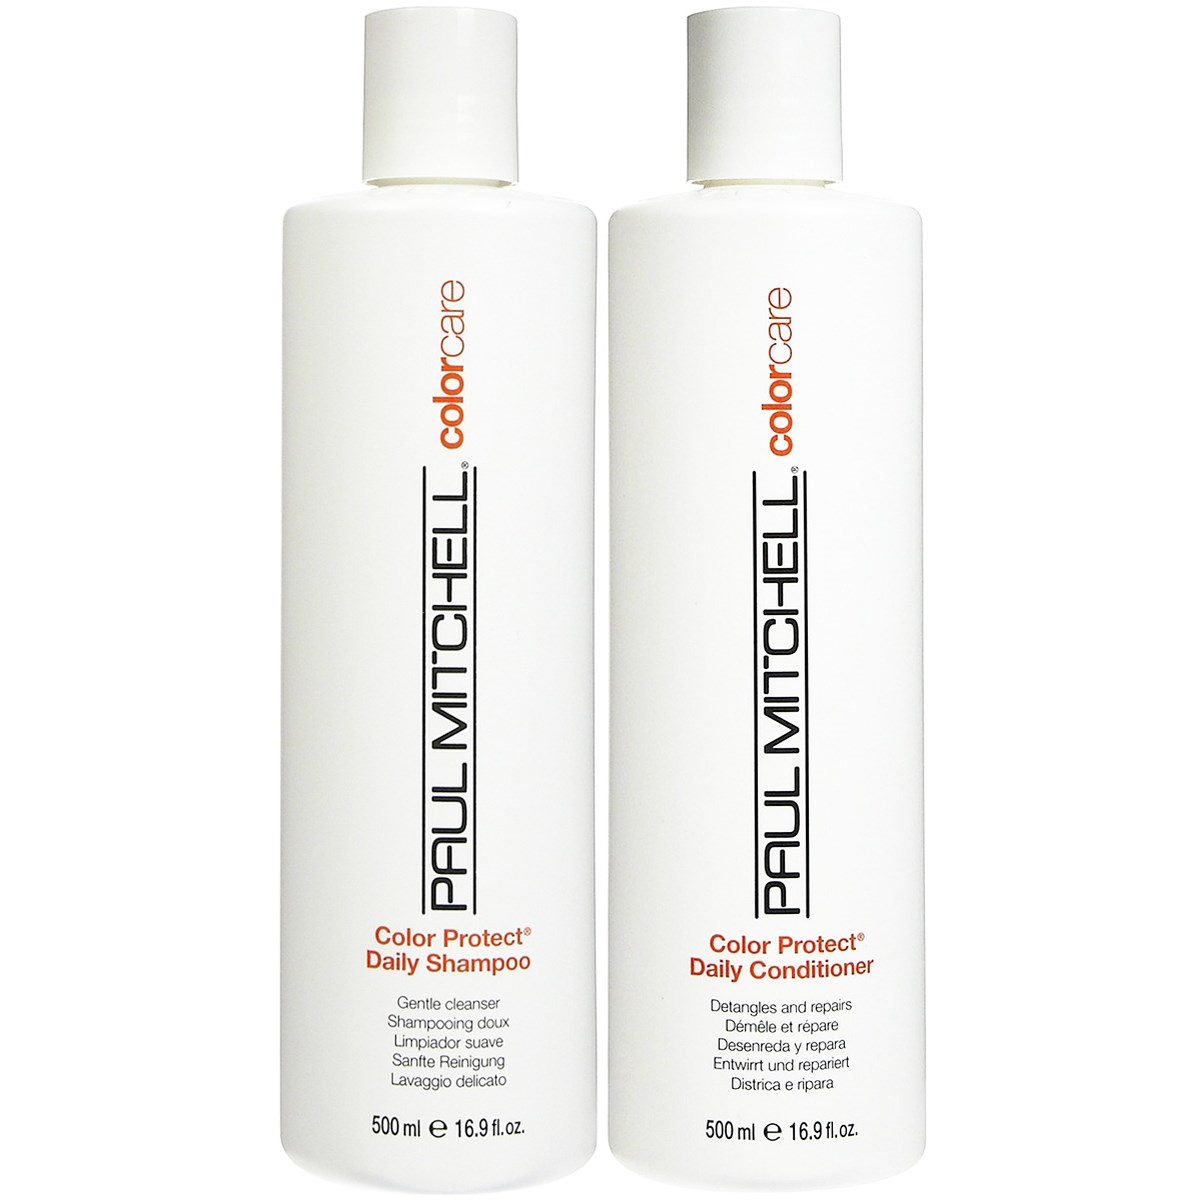 Läs mer om Paul Mitchell ColorCare Color Protect Daily Paket